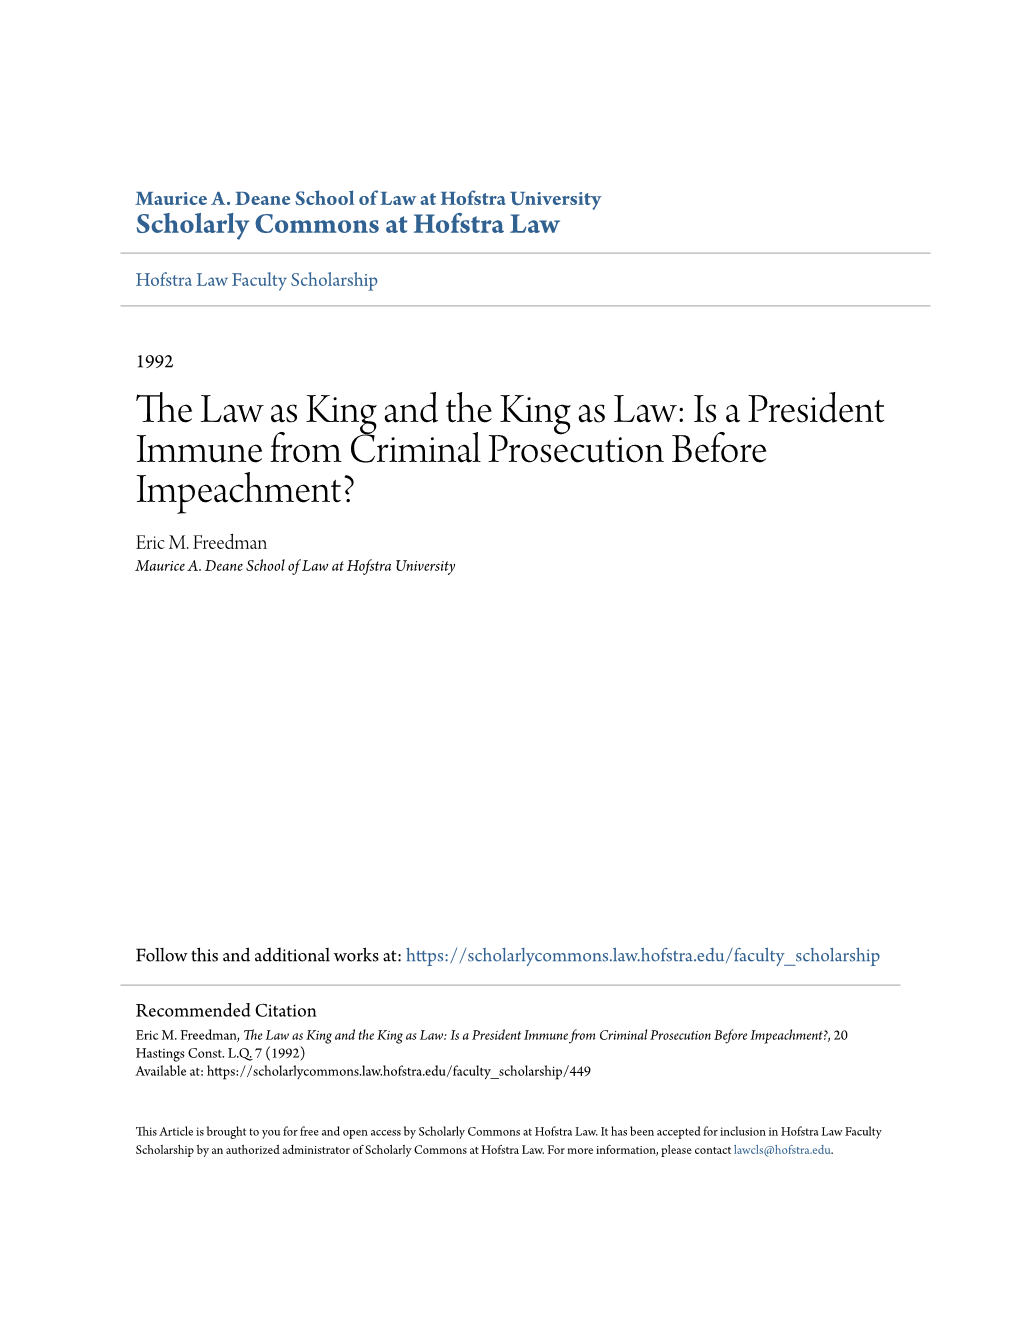 The Law As King and the King As Law: Is a President Immune from Criminal Prosecution Before Impeachment? Eric M